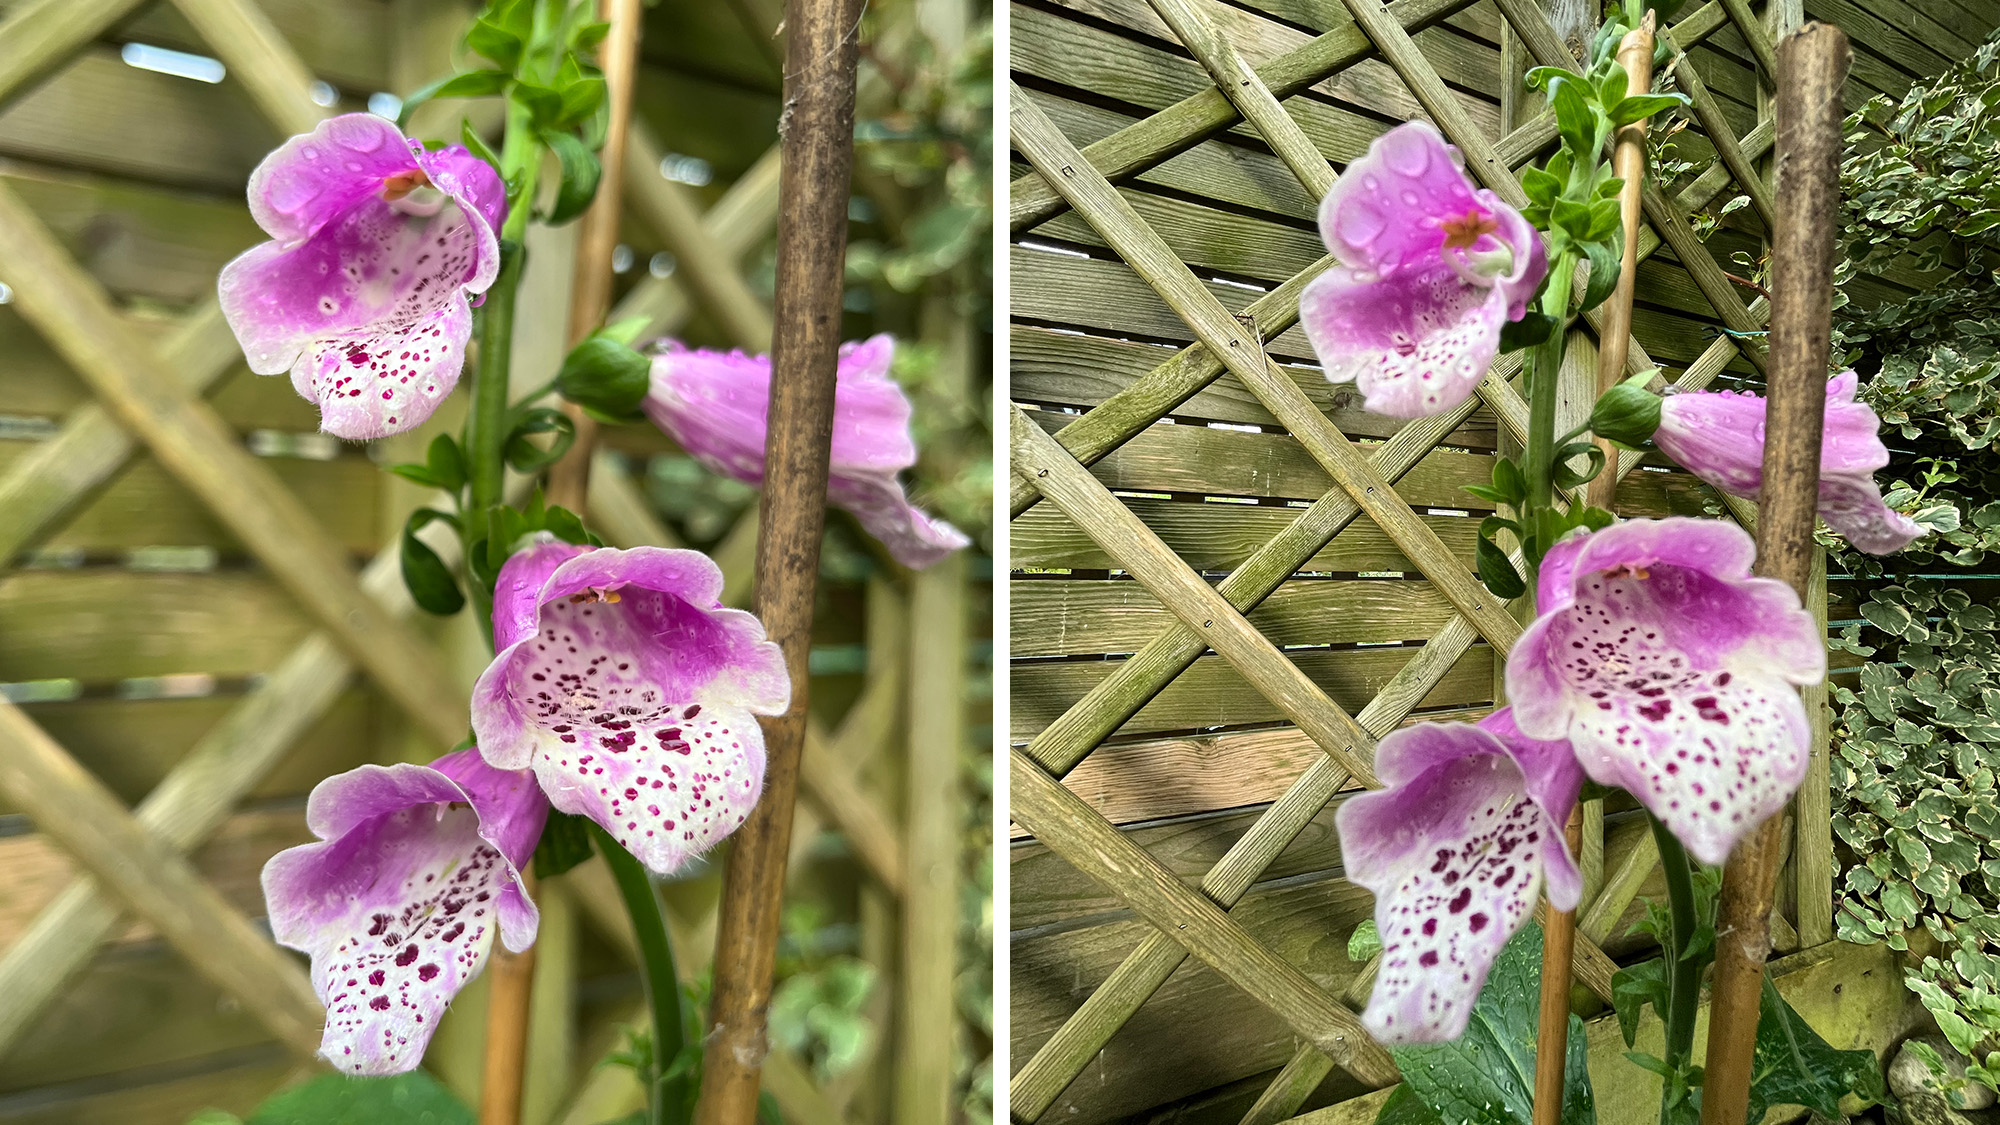 Focal length, aperture and the distance between subject and background all affect DoF. Look at the difference here, between the iPhone 13’s wide f/1.6 (left) and ultra-wide f/2.4 (right) lenses.